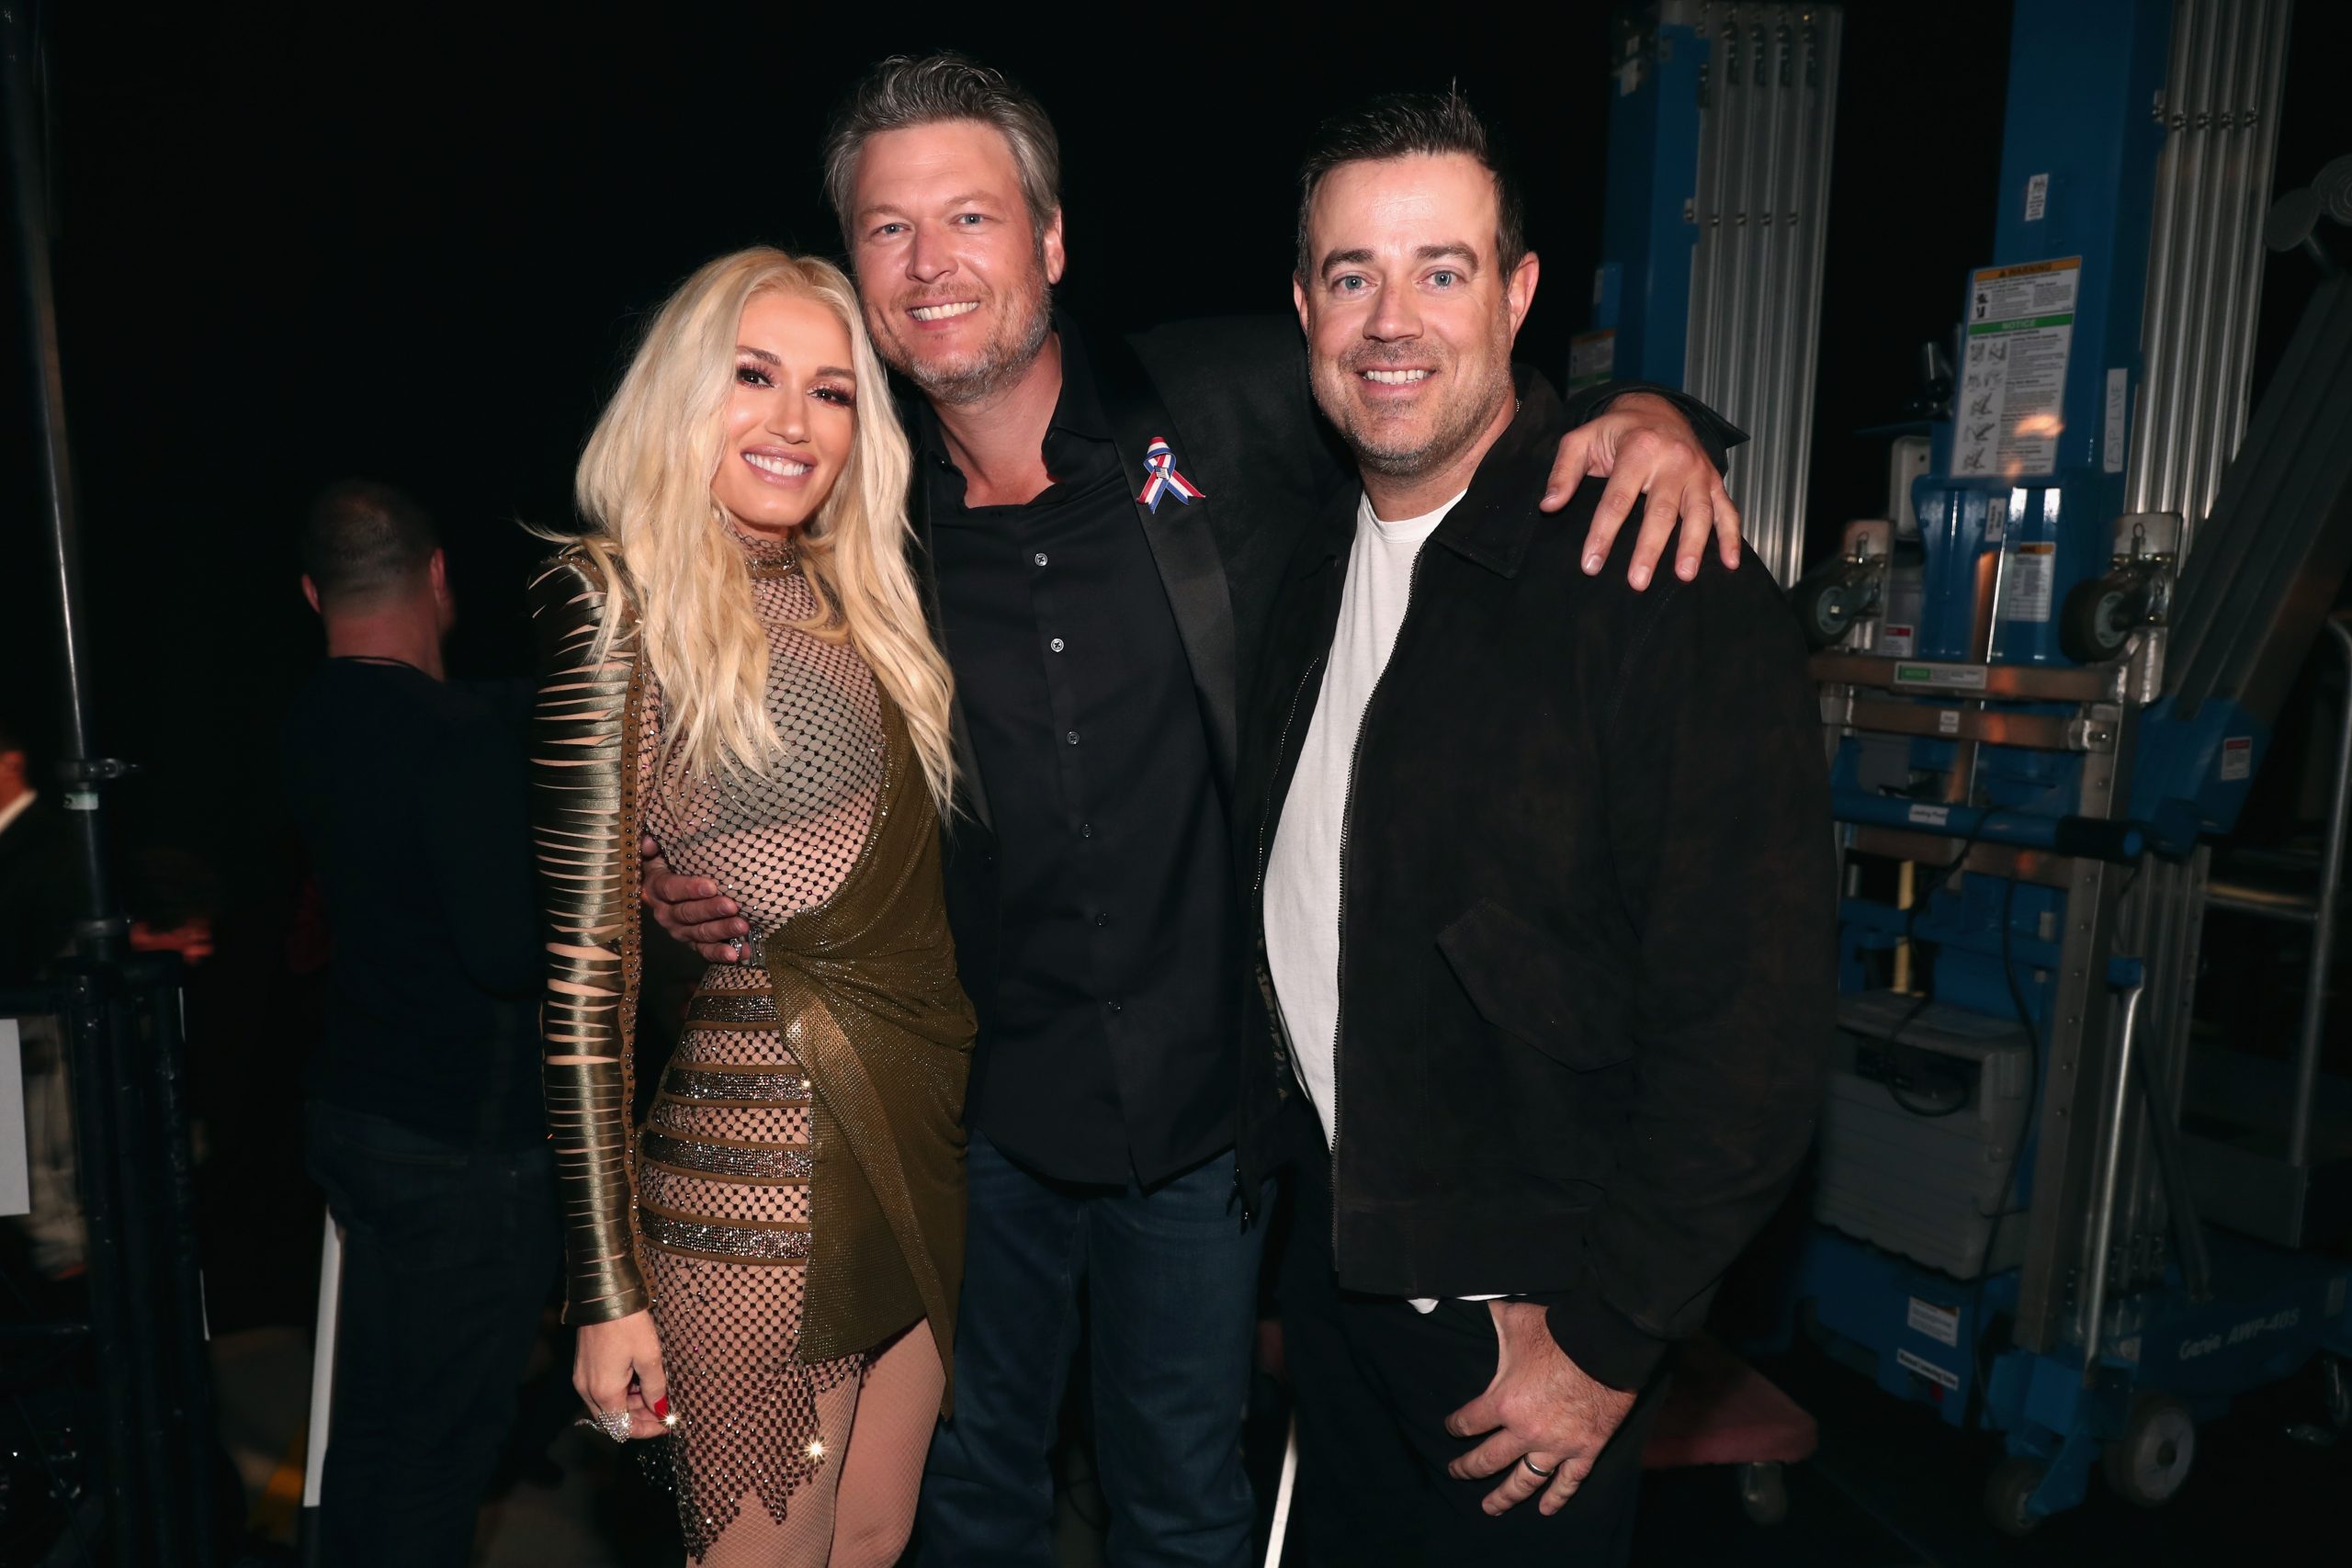 Gwen Stefani, Blake Shelton, and Carson Daly at the People's Choice Awards in 2018